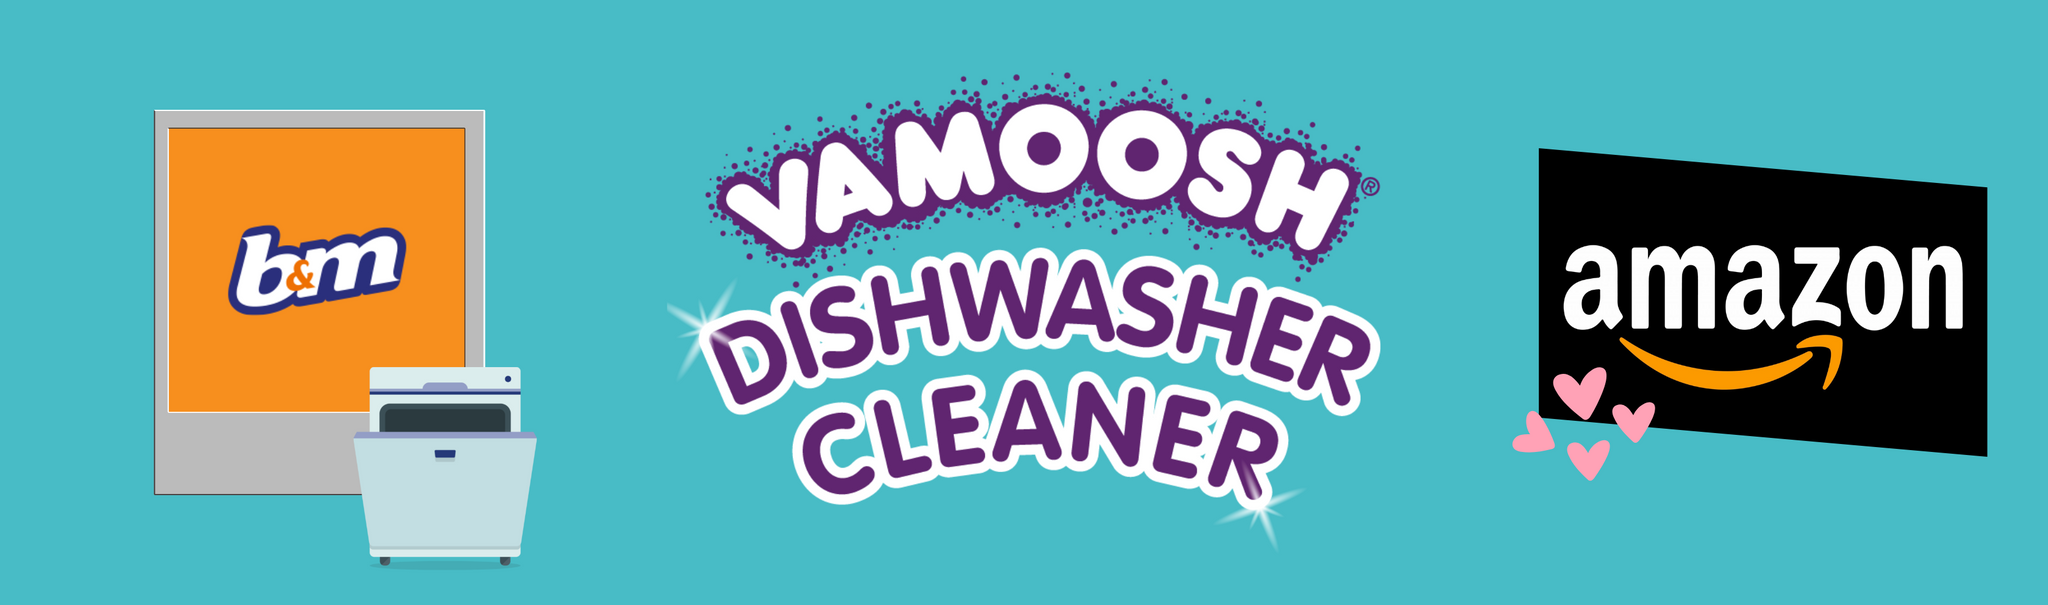 NEW DISHWASHER CLEANER NOW AVAILABLE IN B&M AND ON AMAZON